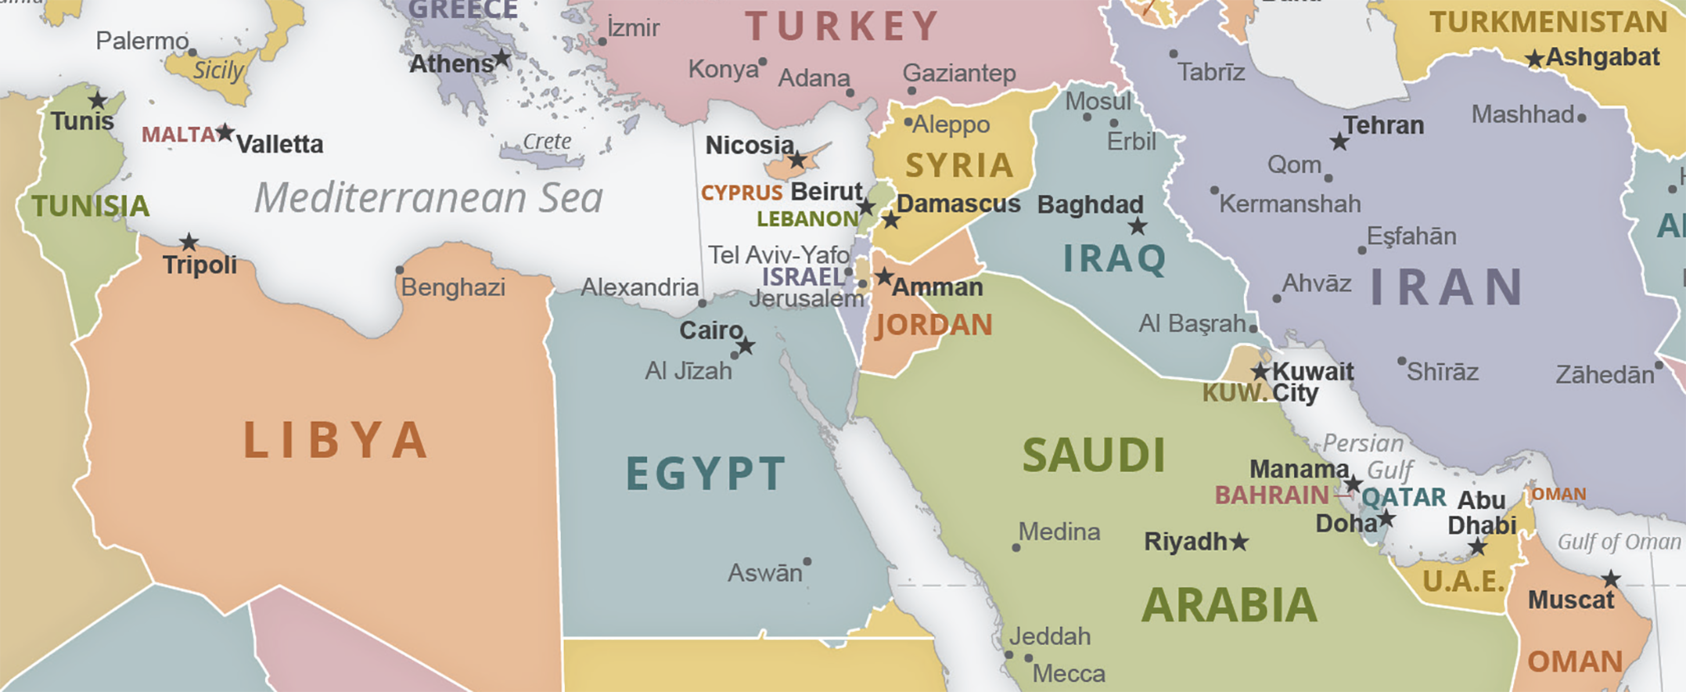 Middle East political map (CIA)